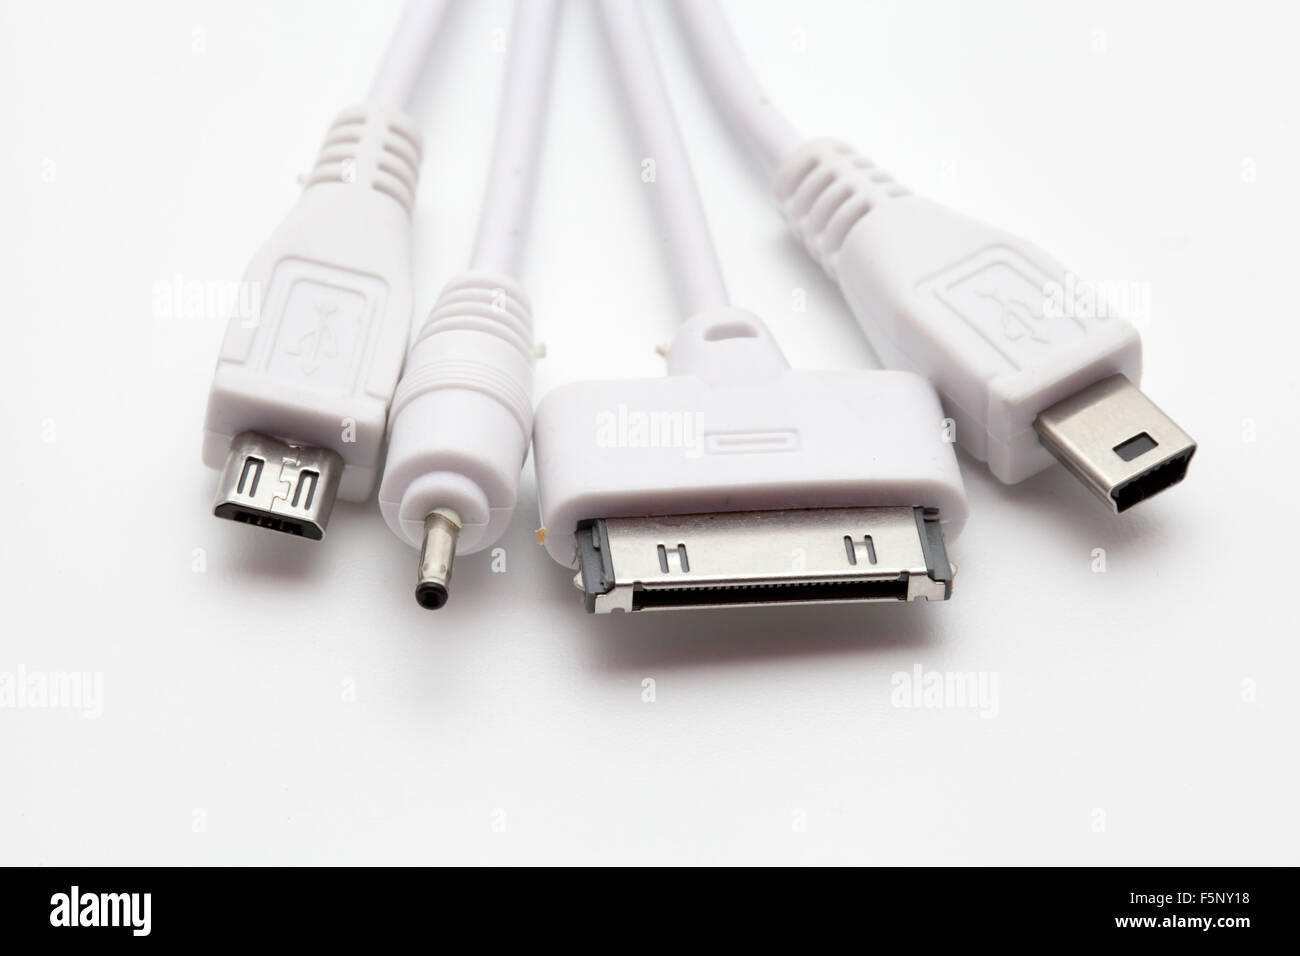 old standard phone connectors on white background Stock Photo